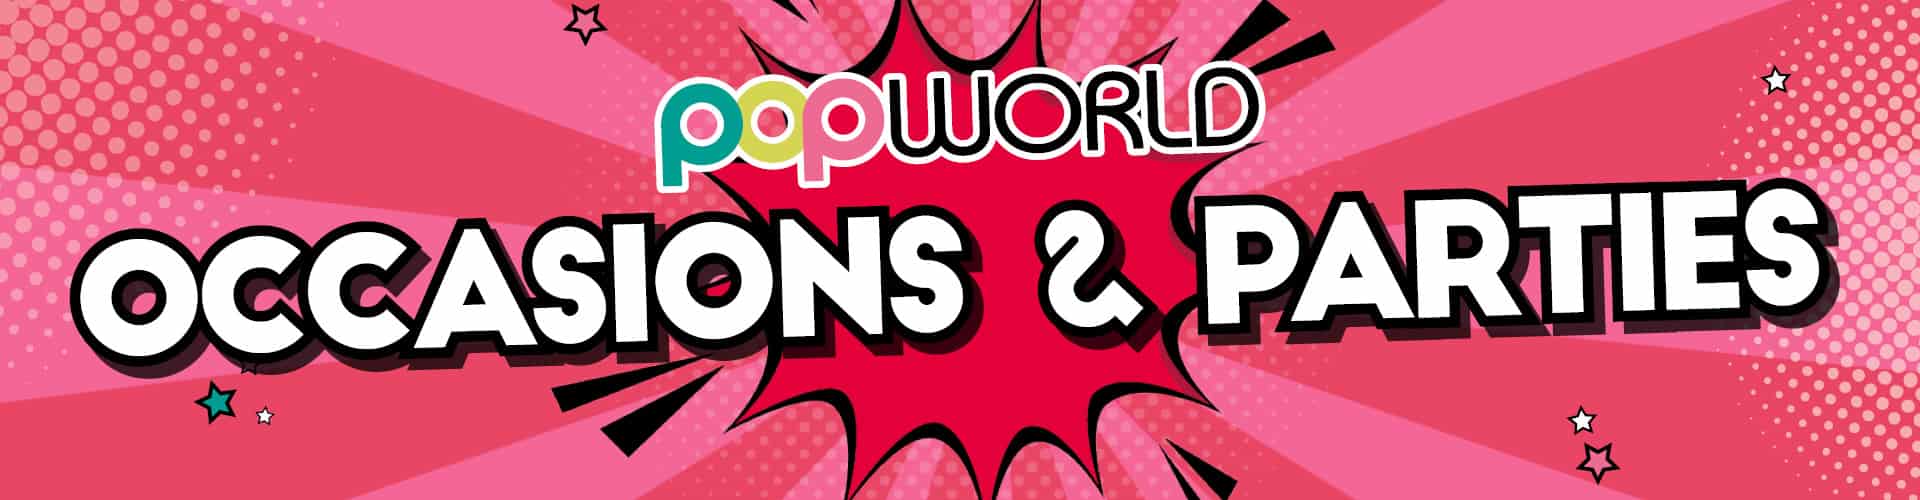 Occasions and Parties at Popworld and Zinc Redditch